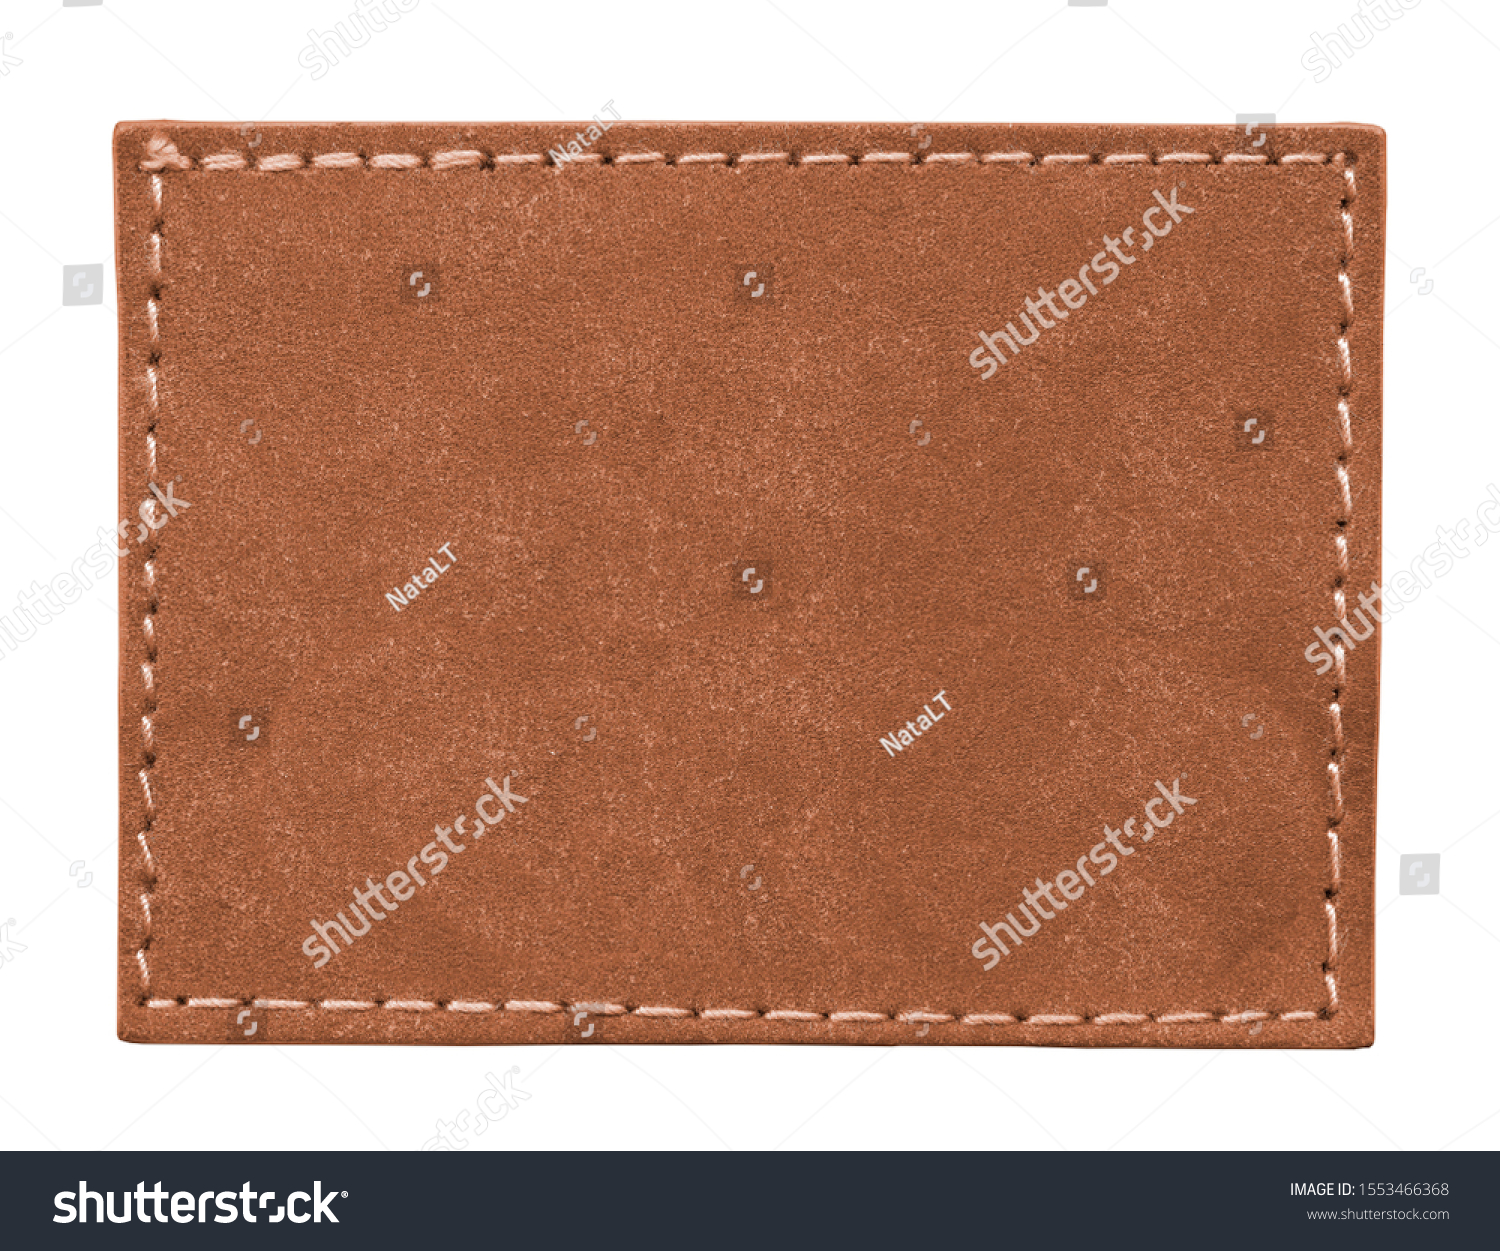 blank reddish-brown leather label isolated on white  #1553466368